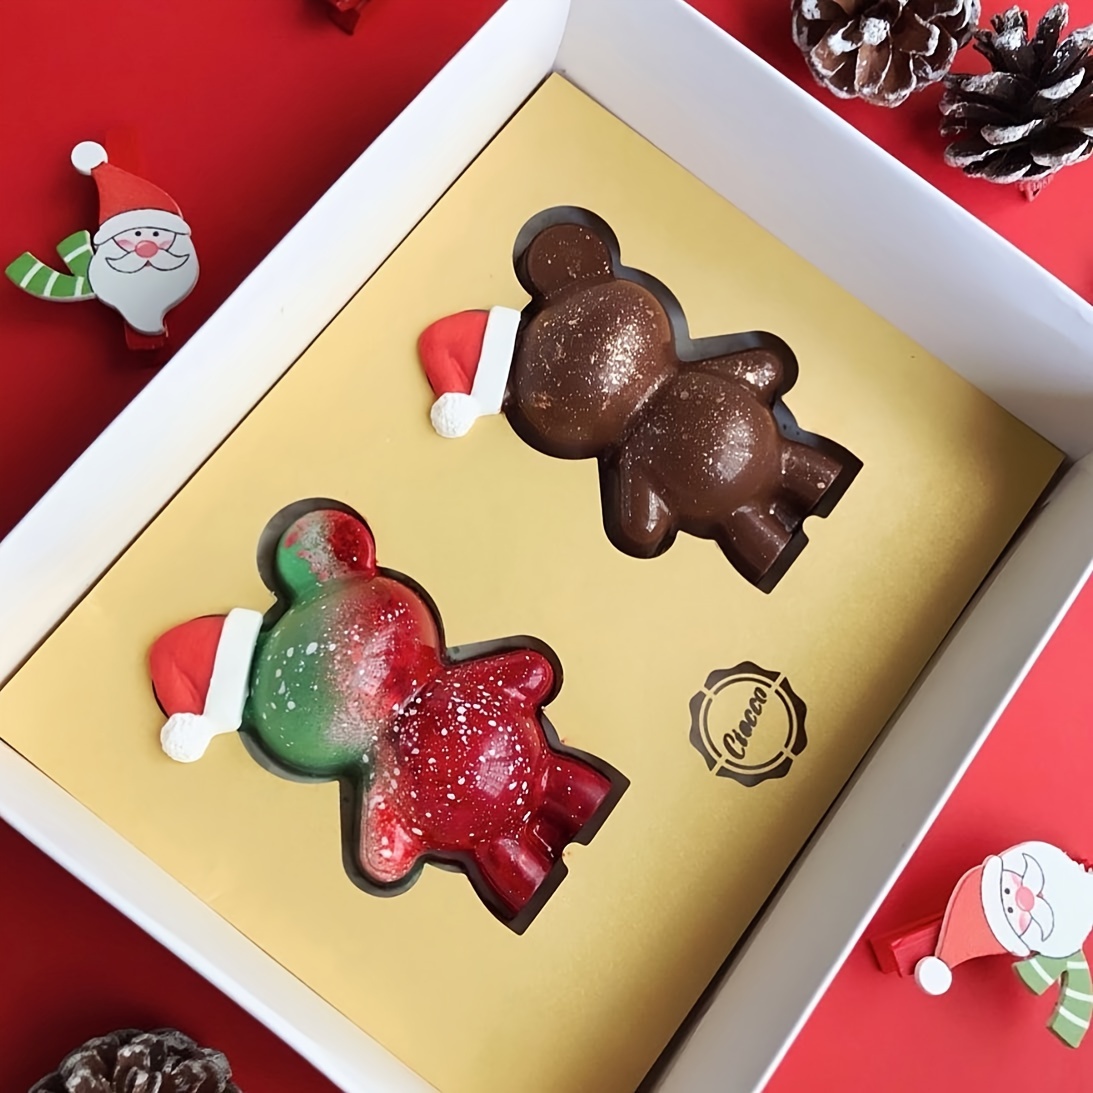 OAVQHLG3B Bear Chocolate Silicone Molds,3D Teddy Bear Breakable Mold for  Smash Bears,Candy Molds,Mousse Cake,Dessert Baking,Jello,Big Gummy Bear,Birthday  Valentines Day 